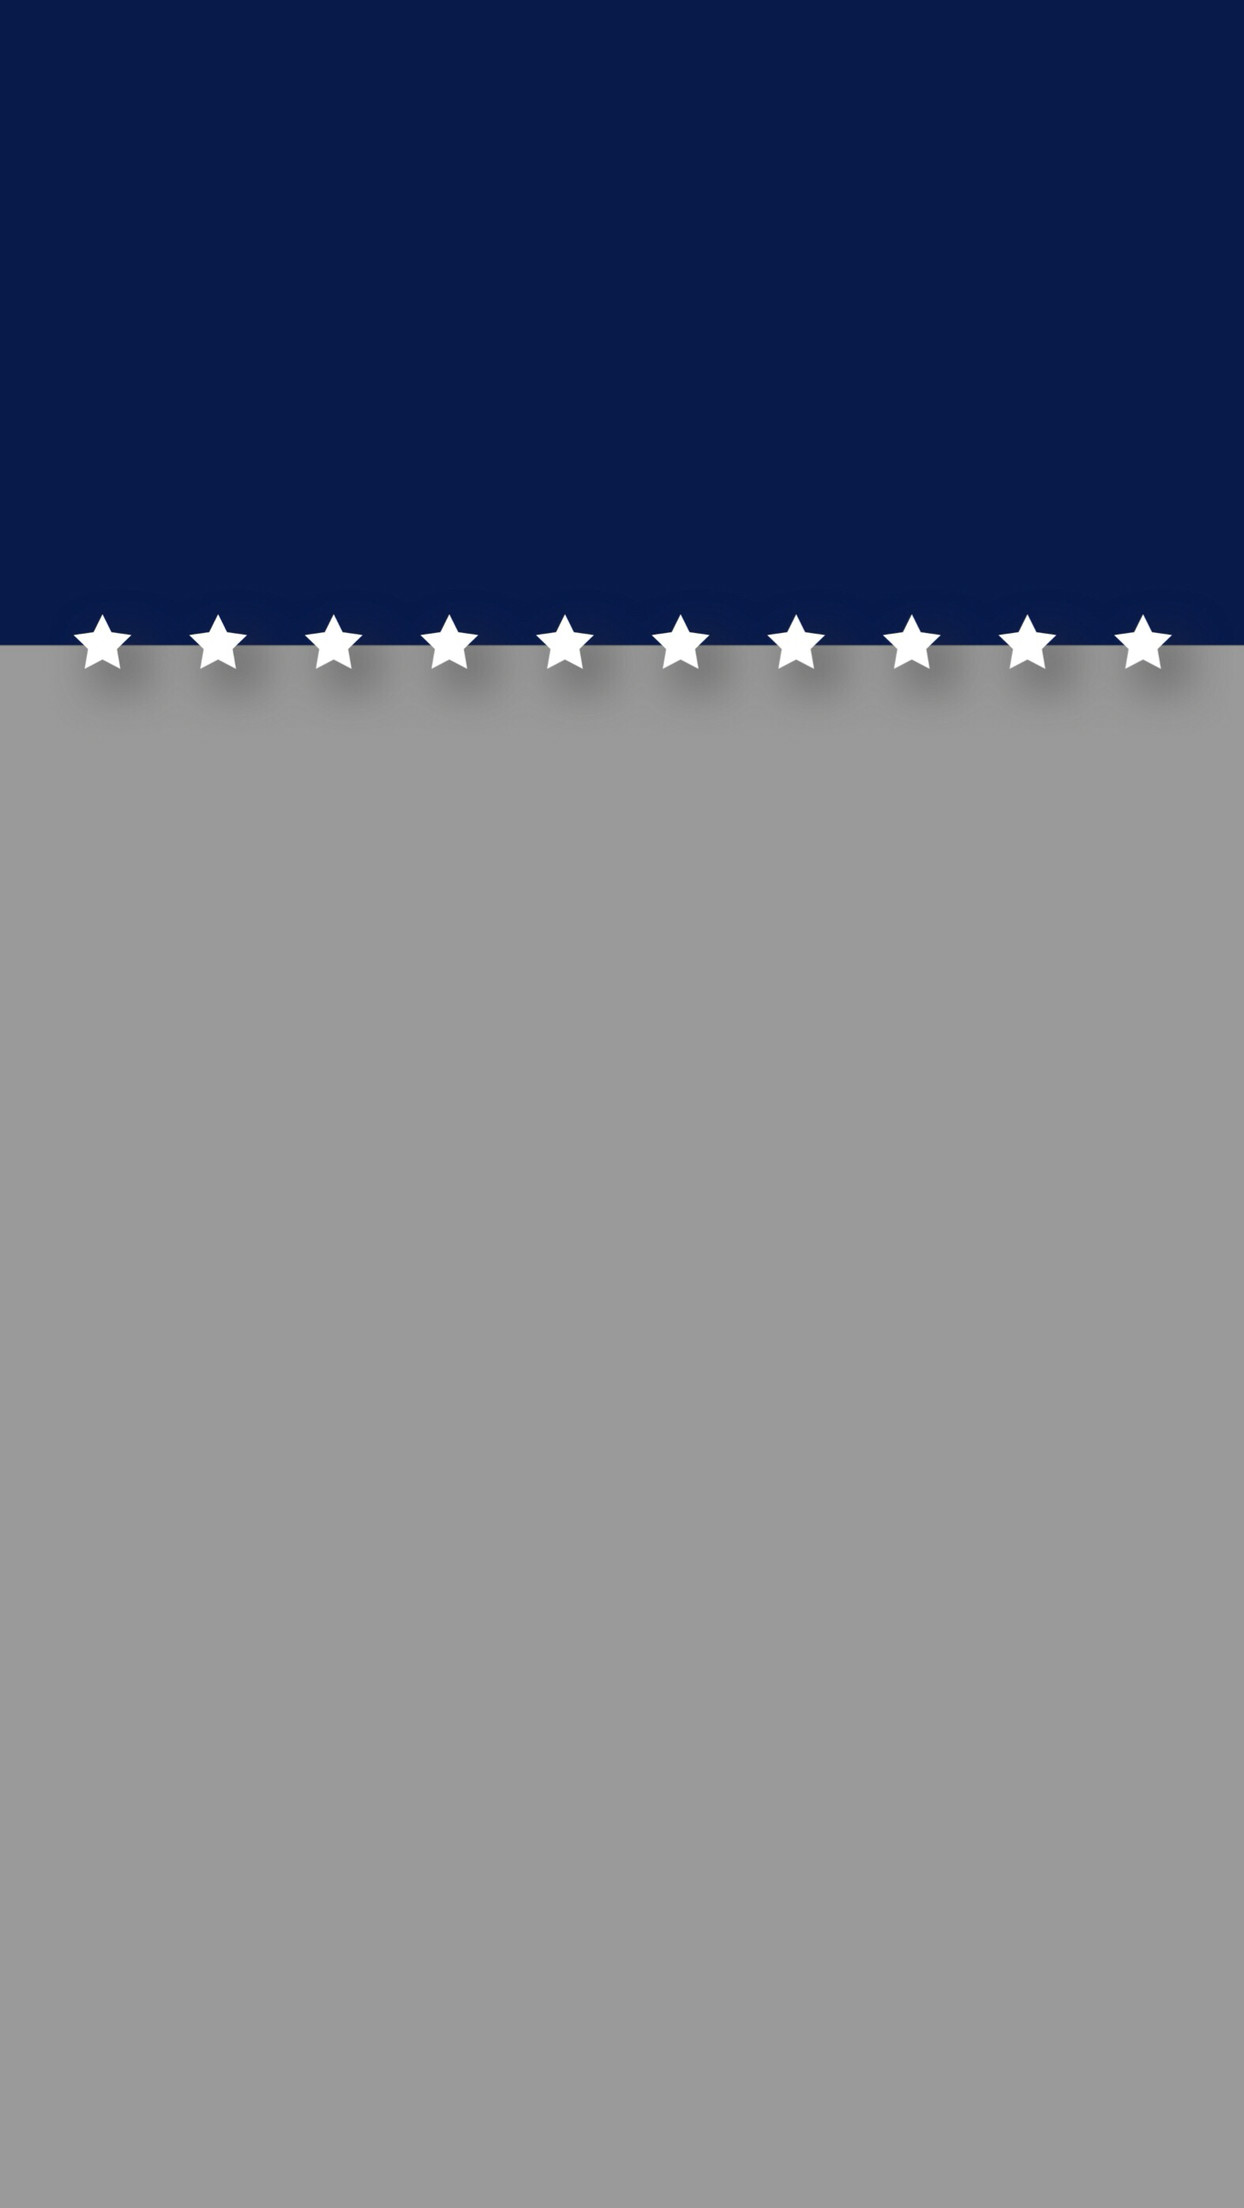 Minimal blue and gray with stars patriotic iPhone 6 Plus lock screen  wallpaper.